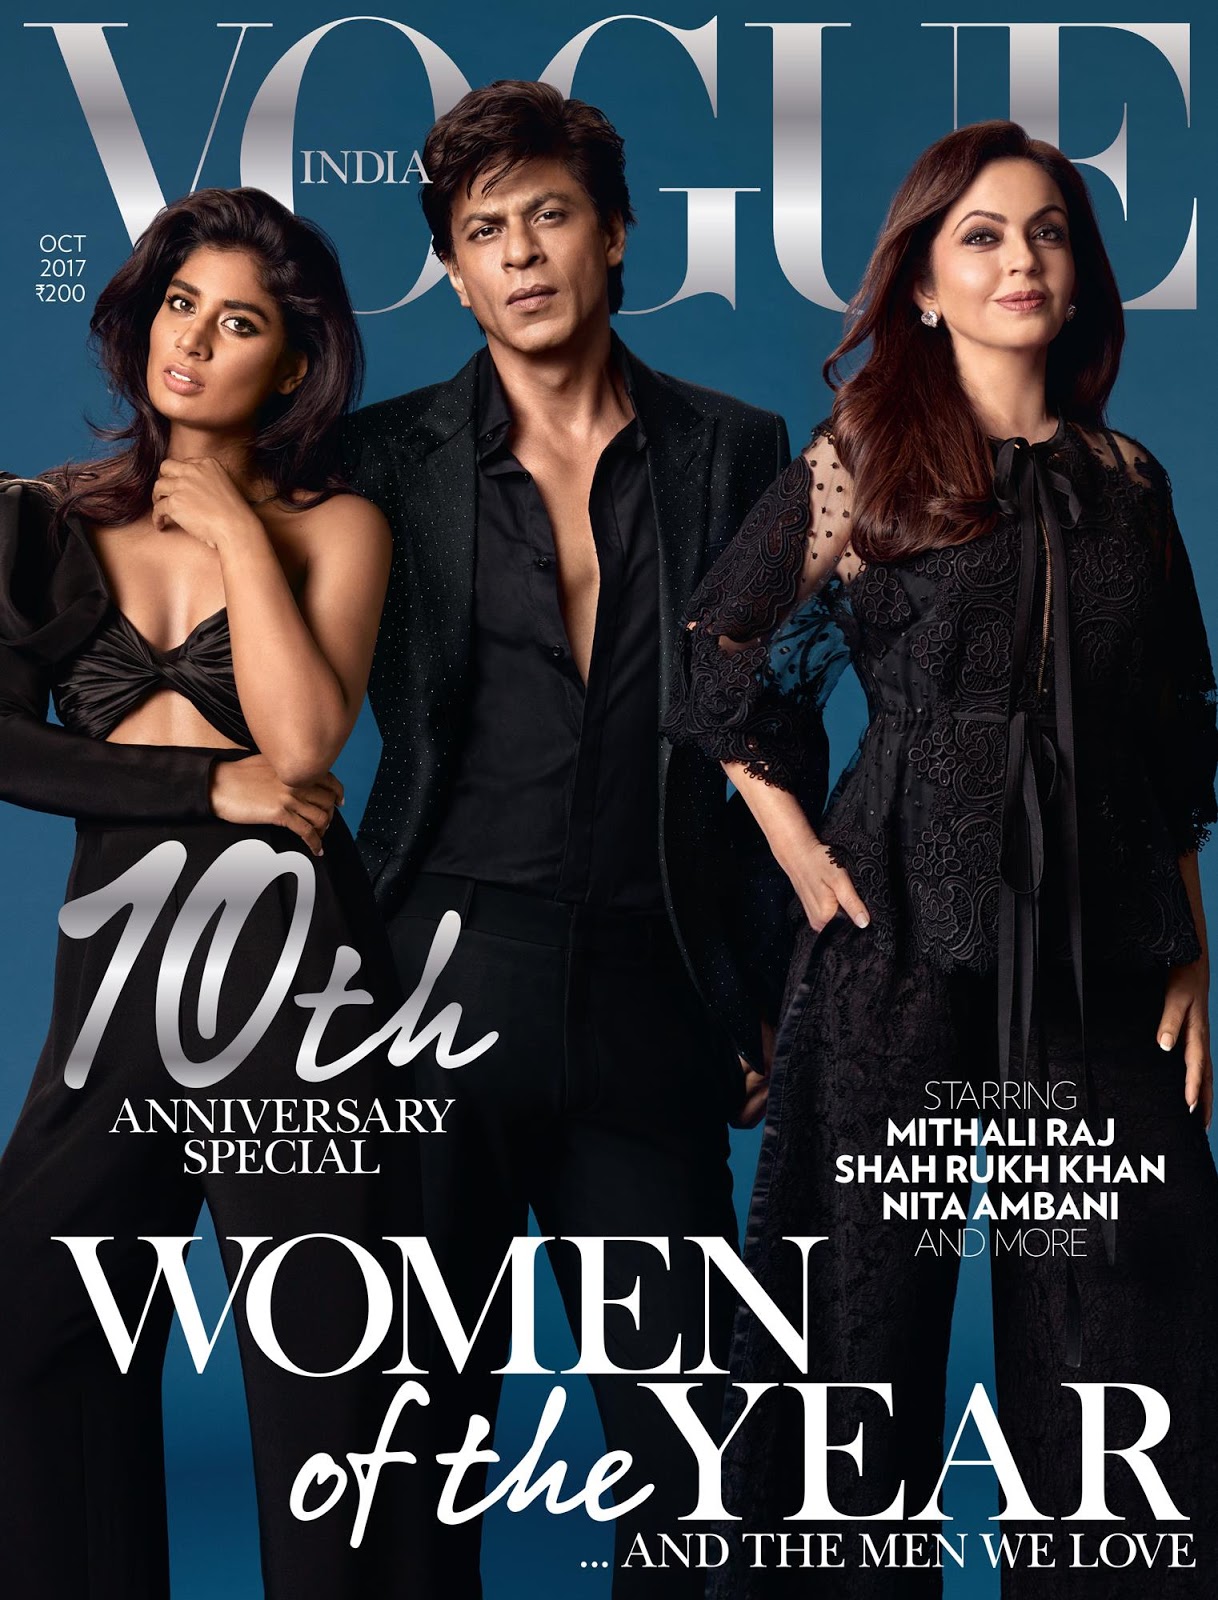 Vogue's Covers: Vogue India